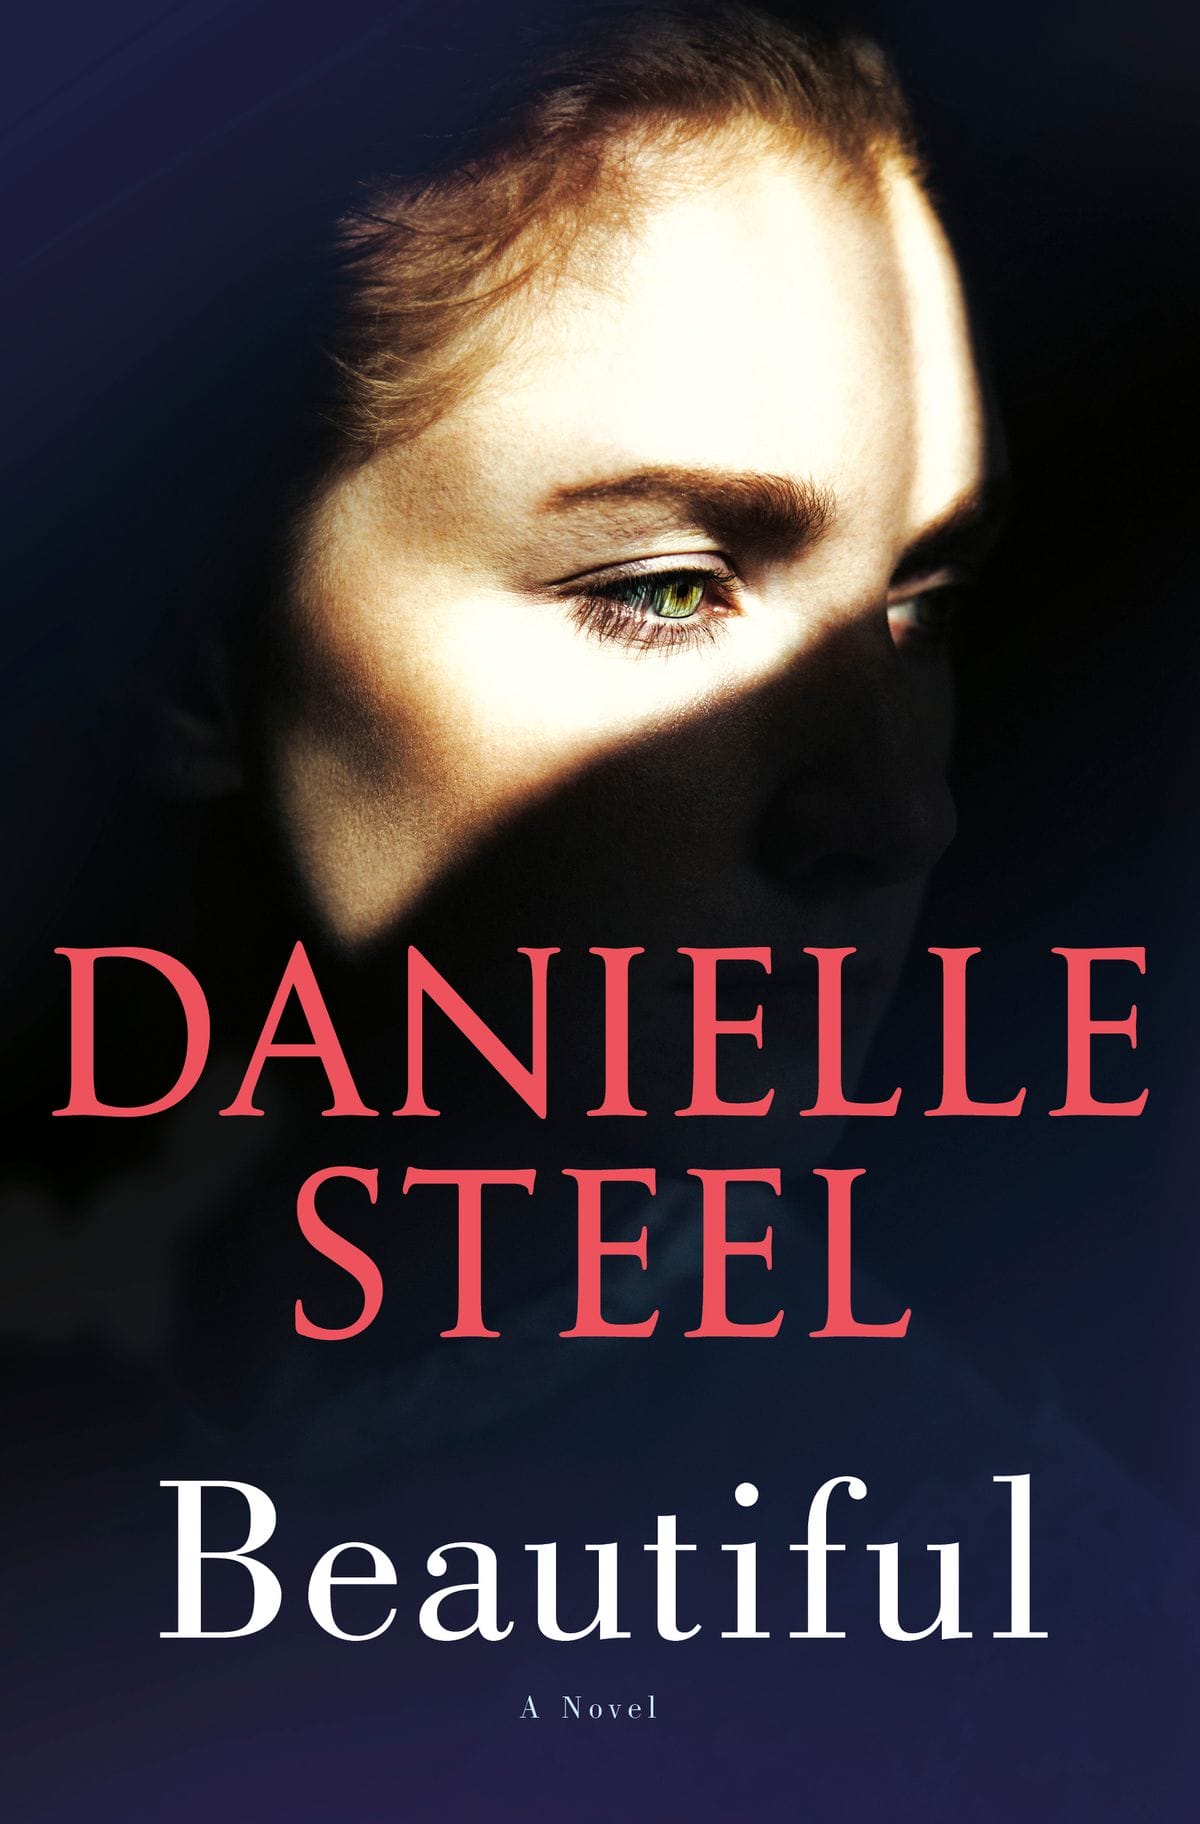 Danielle Steel Books 2022 Every New Release This Year RomanceDevoured